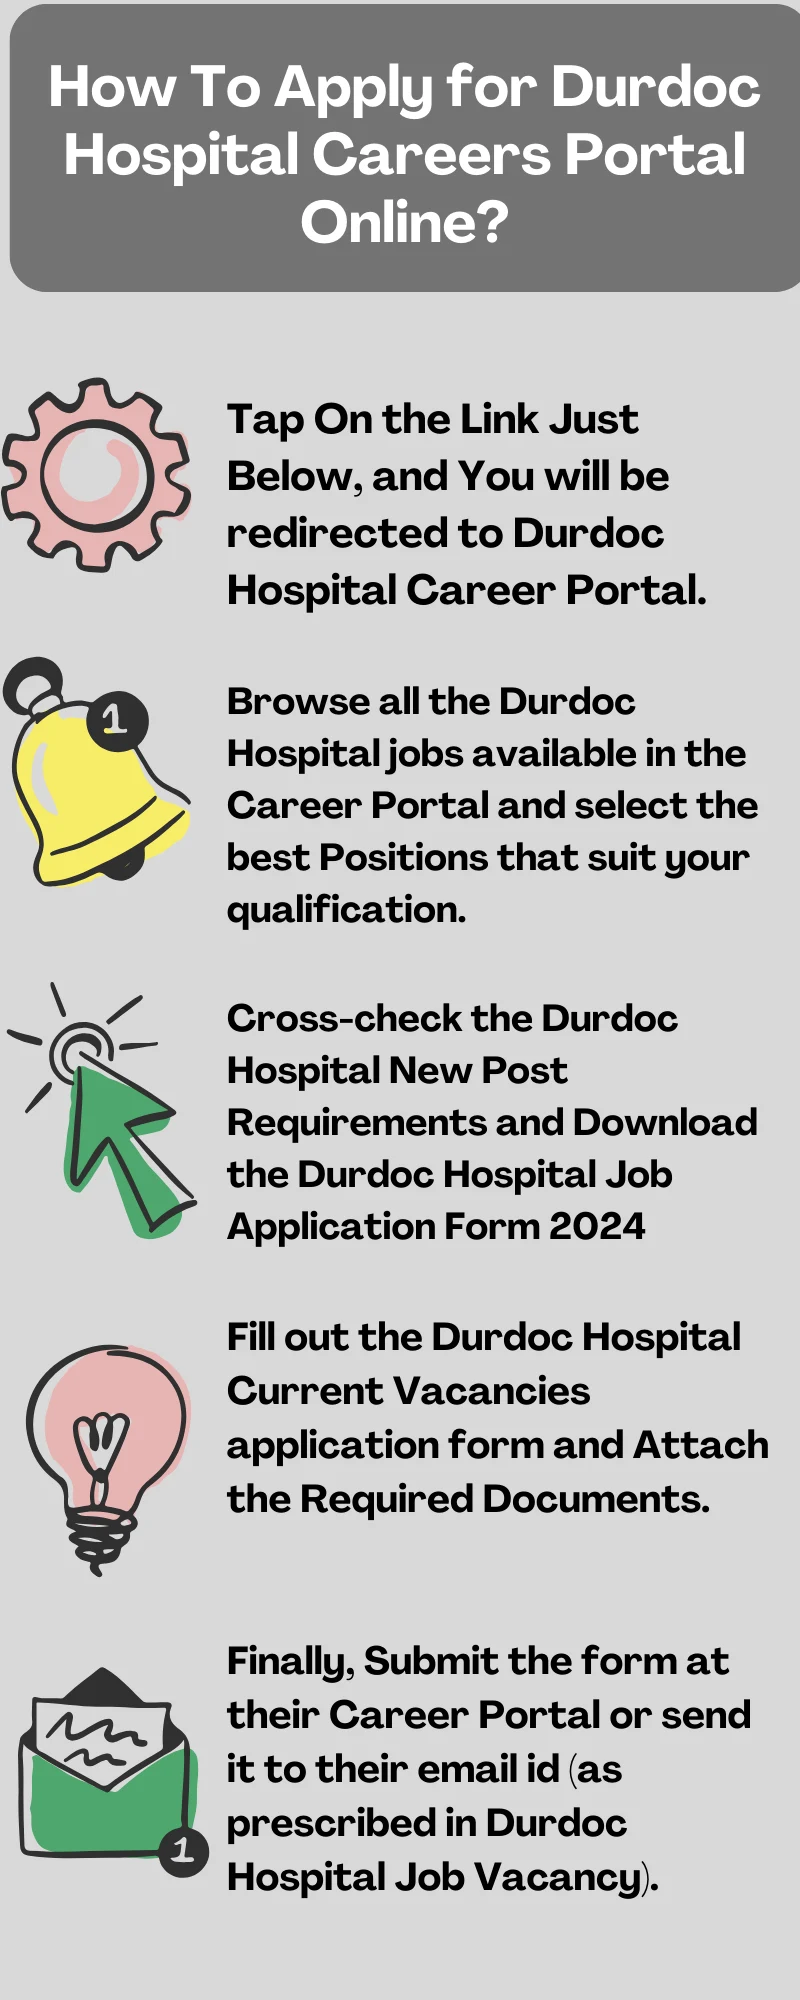 How To Apply for Durdoc Hospital Careers Portal Online?